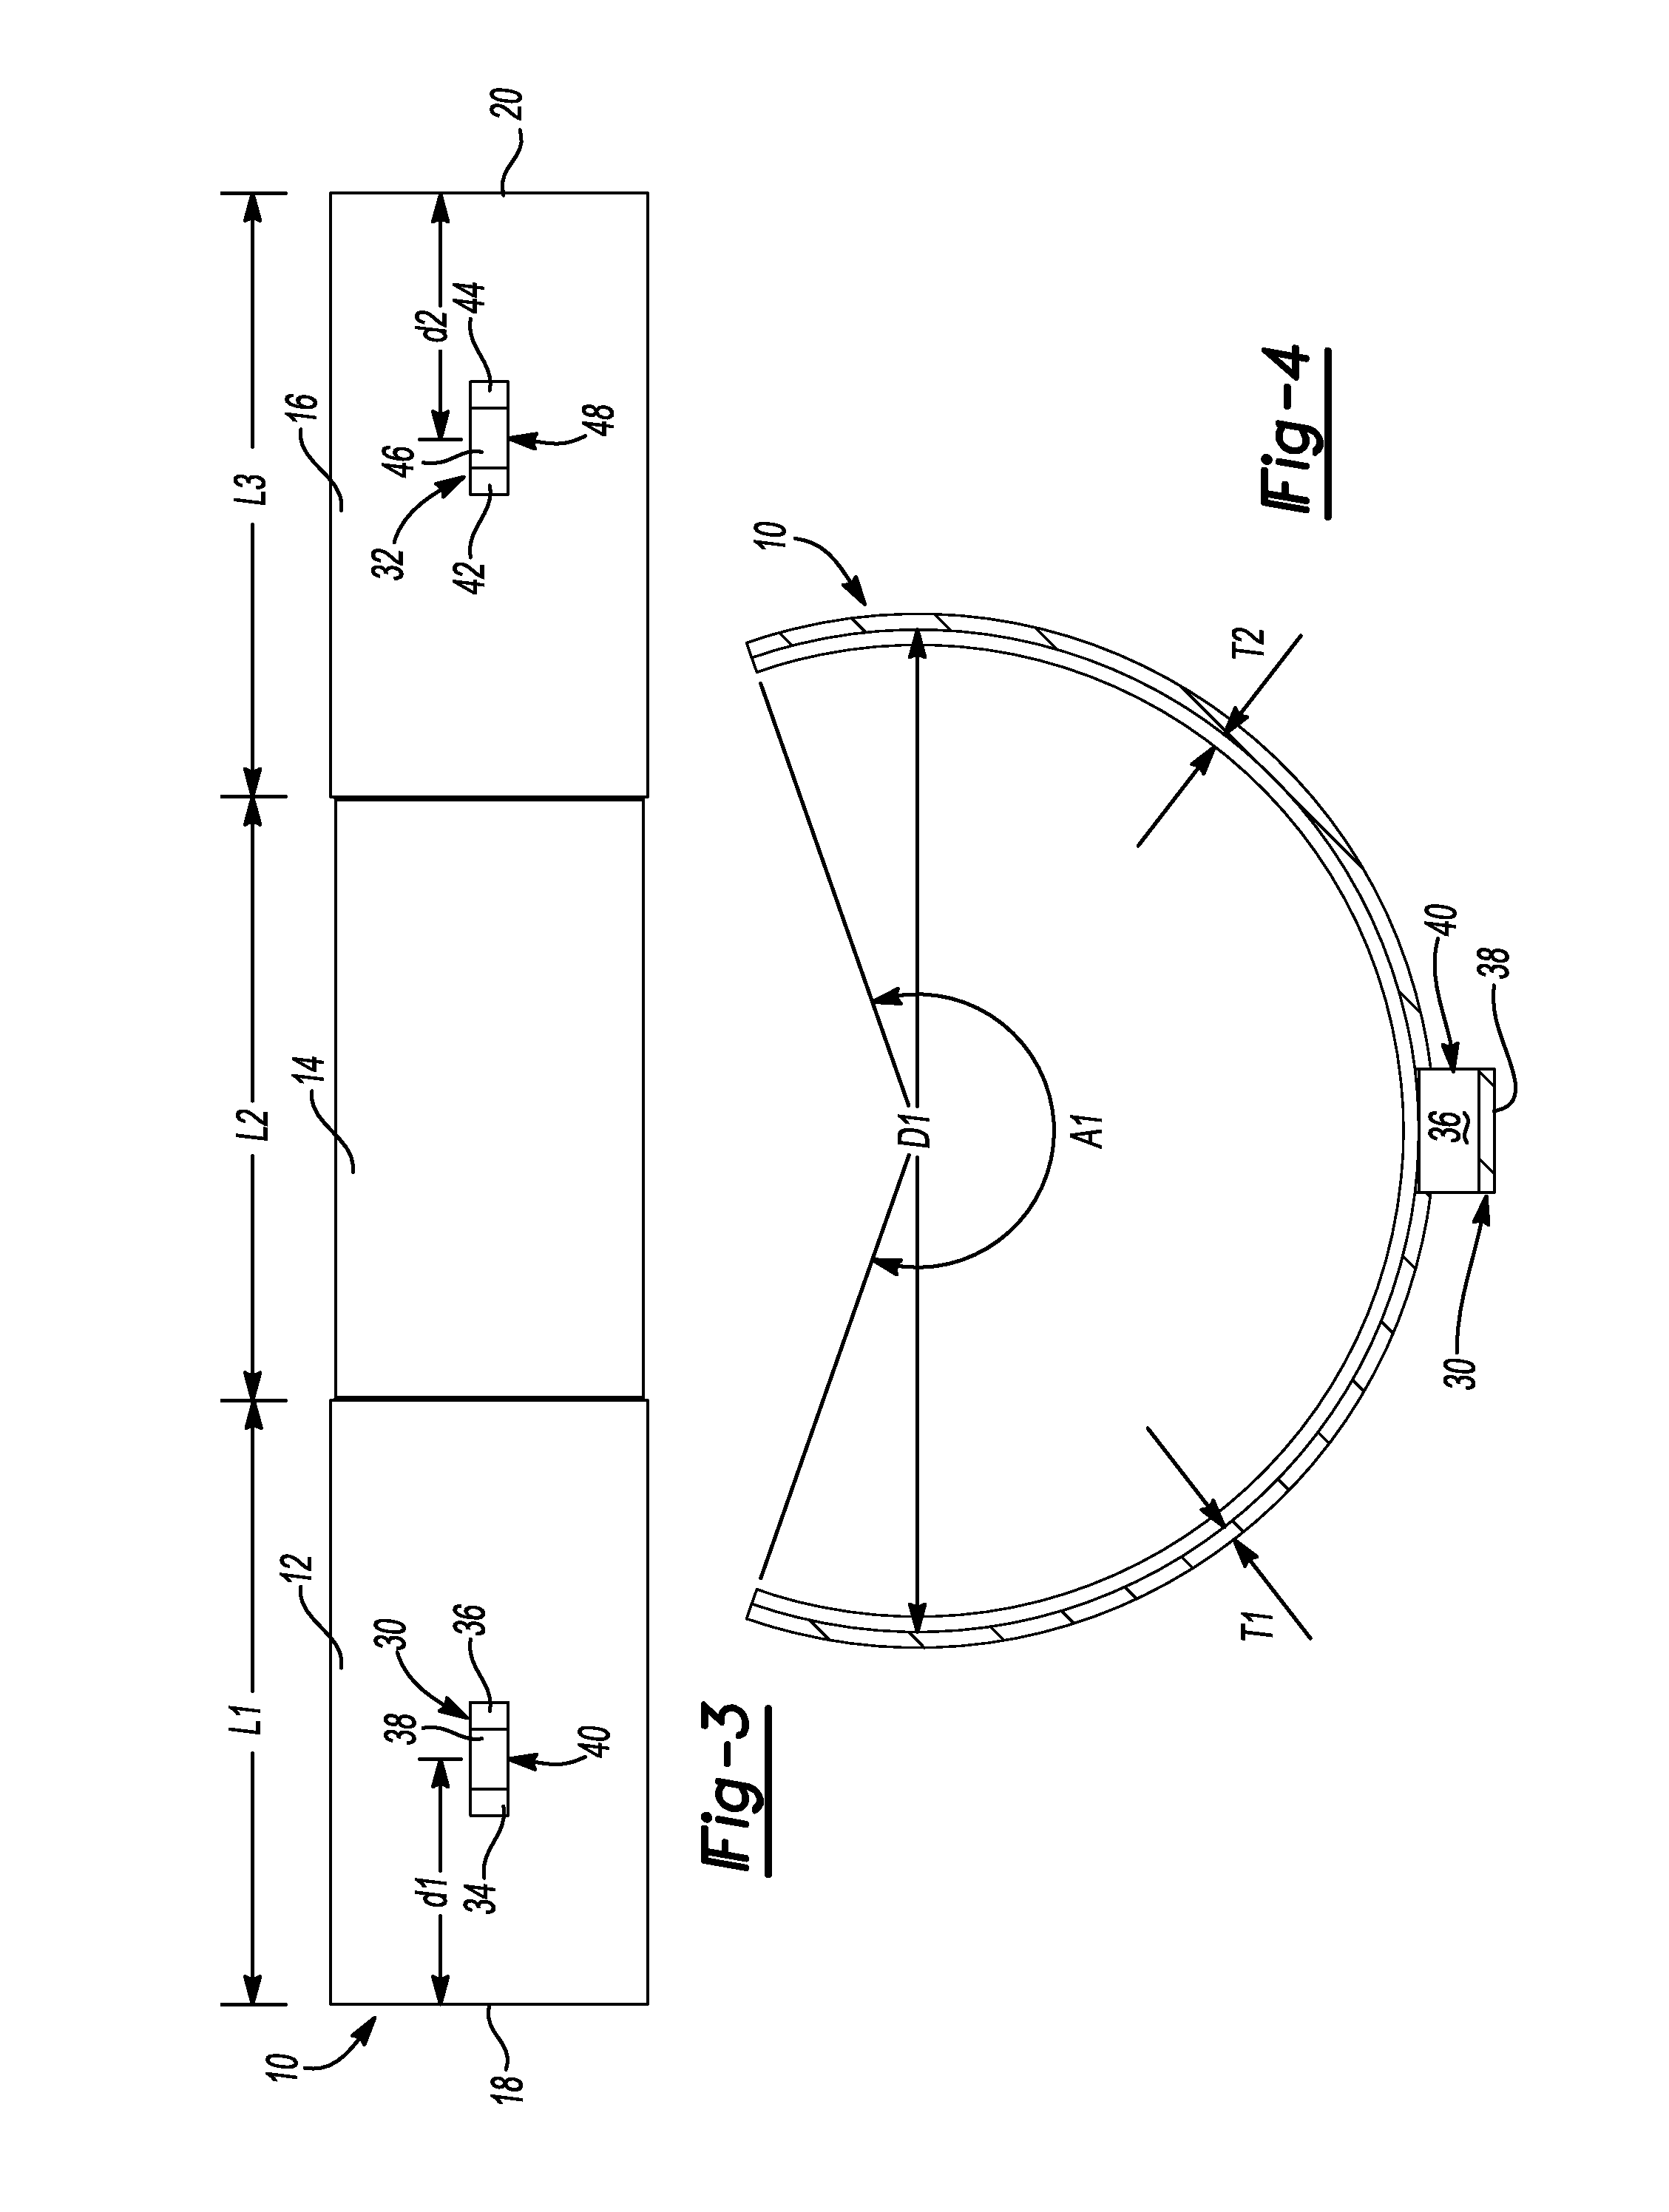 Conduit hanger and support apparatus